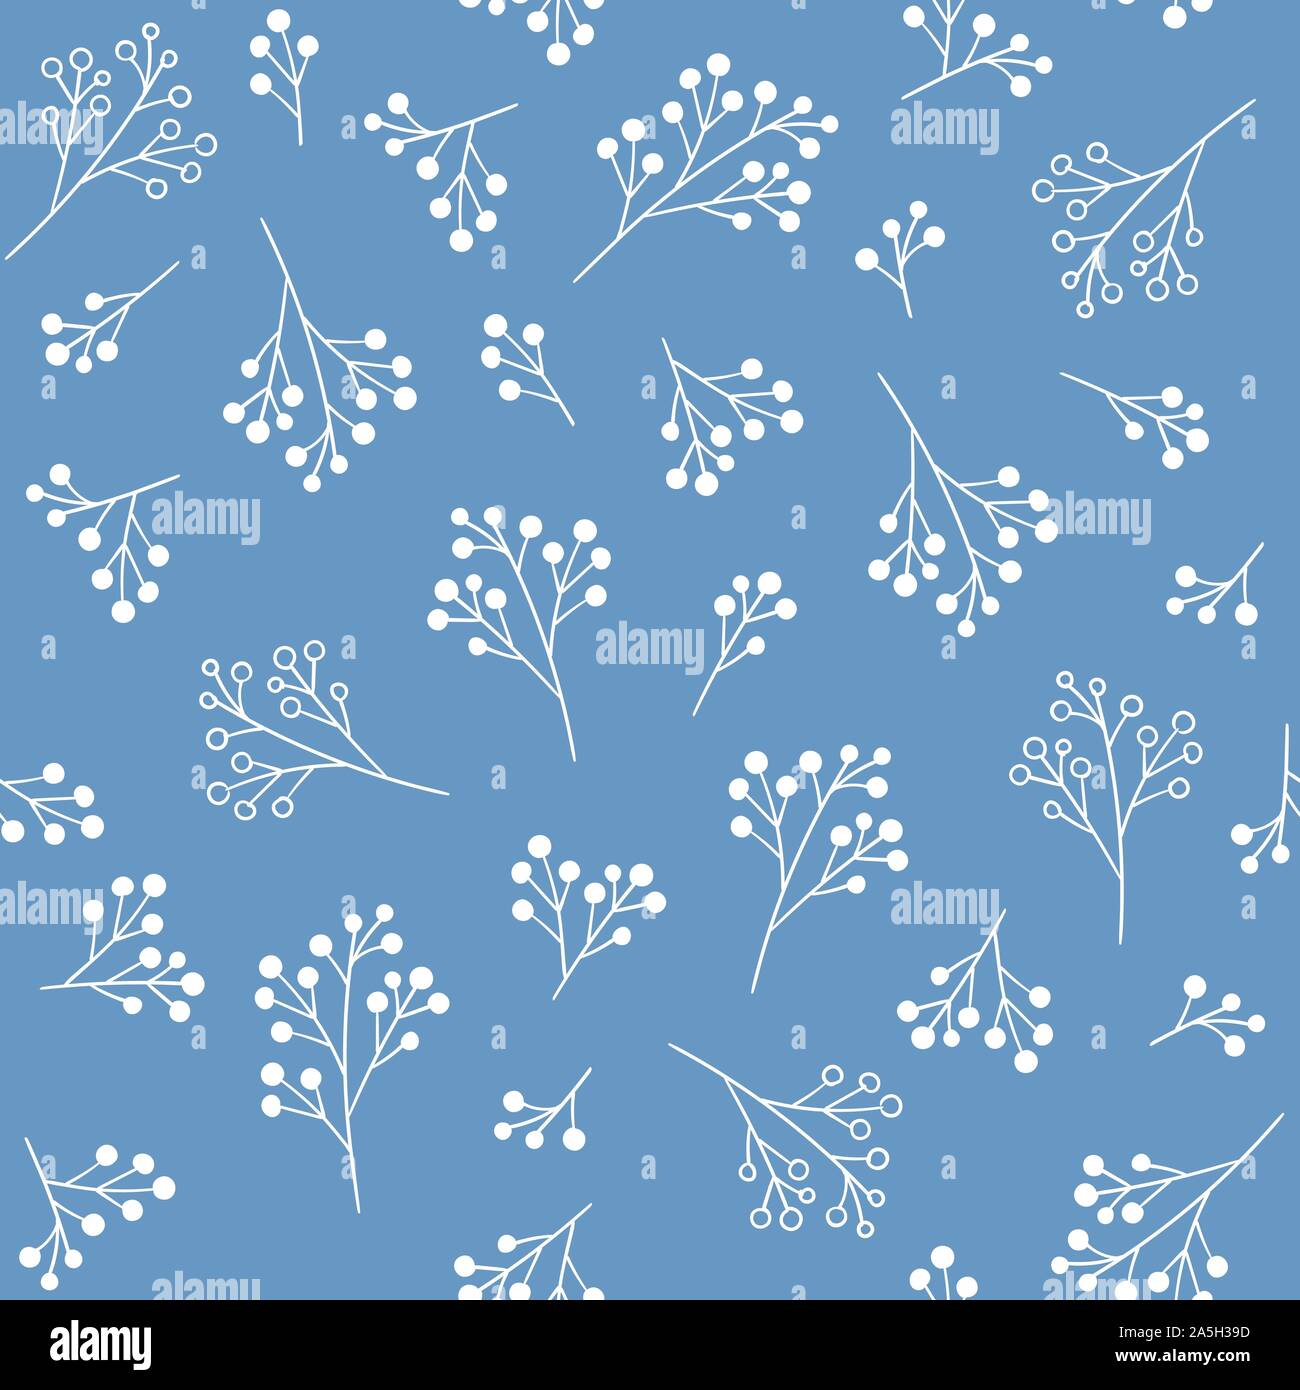 Floral seamless pattern. Fabric print design Stock Vector